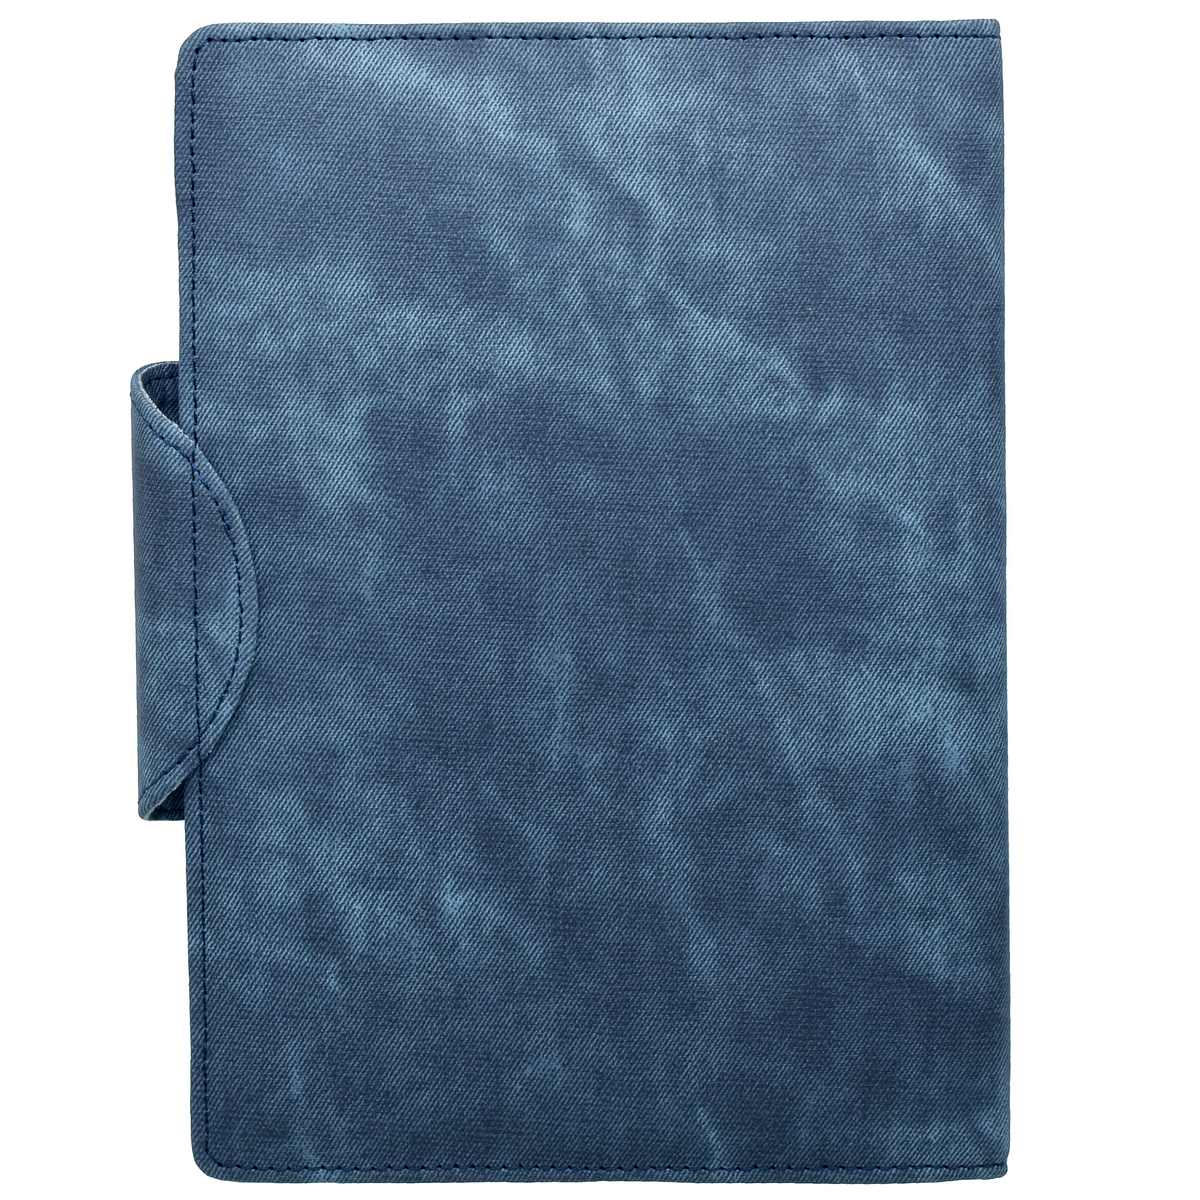 jags-mumbai Notebooks & Diaries Note book Diary A5 Jeans Cloth Blue